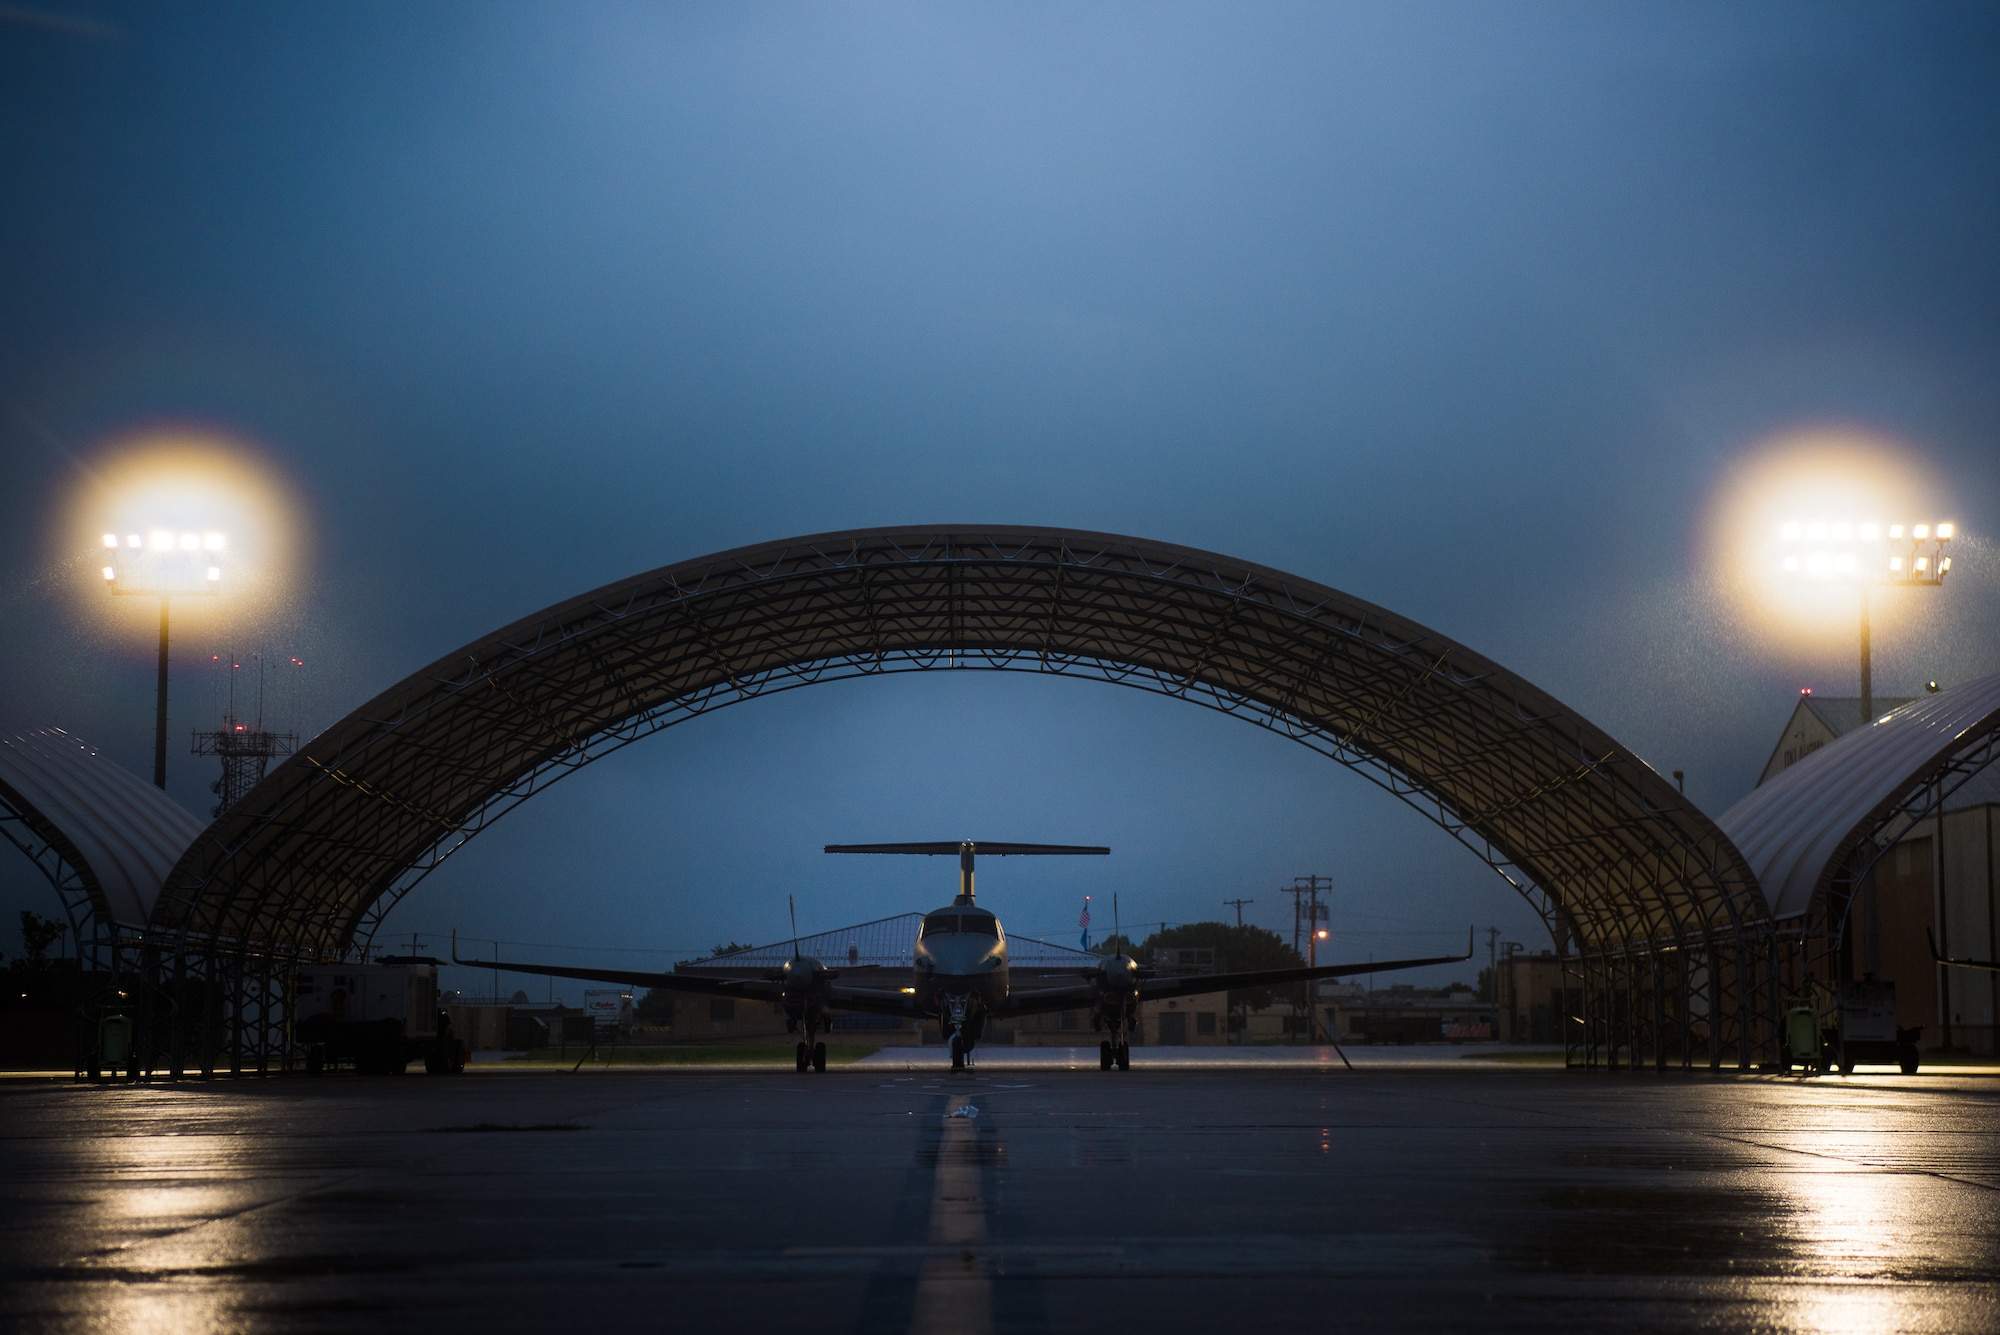 Brand new light-emitting diode, or LED, fixtures illuminate the flight line and its MC-12 Ws in an early morning downpour at Will Rogers Air National Guard Base in Oklahoma City, Sept. 7, 2018. Each pole contains 11 fixtures, which amounts to 66 fixtures on the flightline, and is part of a basewide project that replaced a total of 366 fixtures around the base. (U.S. Air National Guard Photo by Staff Sgt. Kasey M. Phipps)